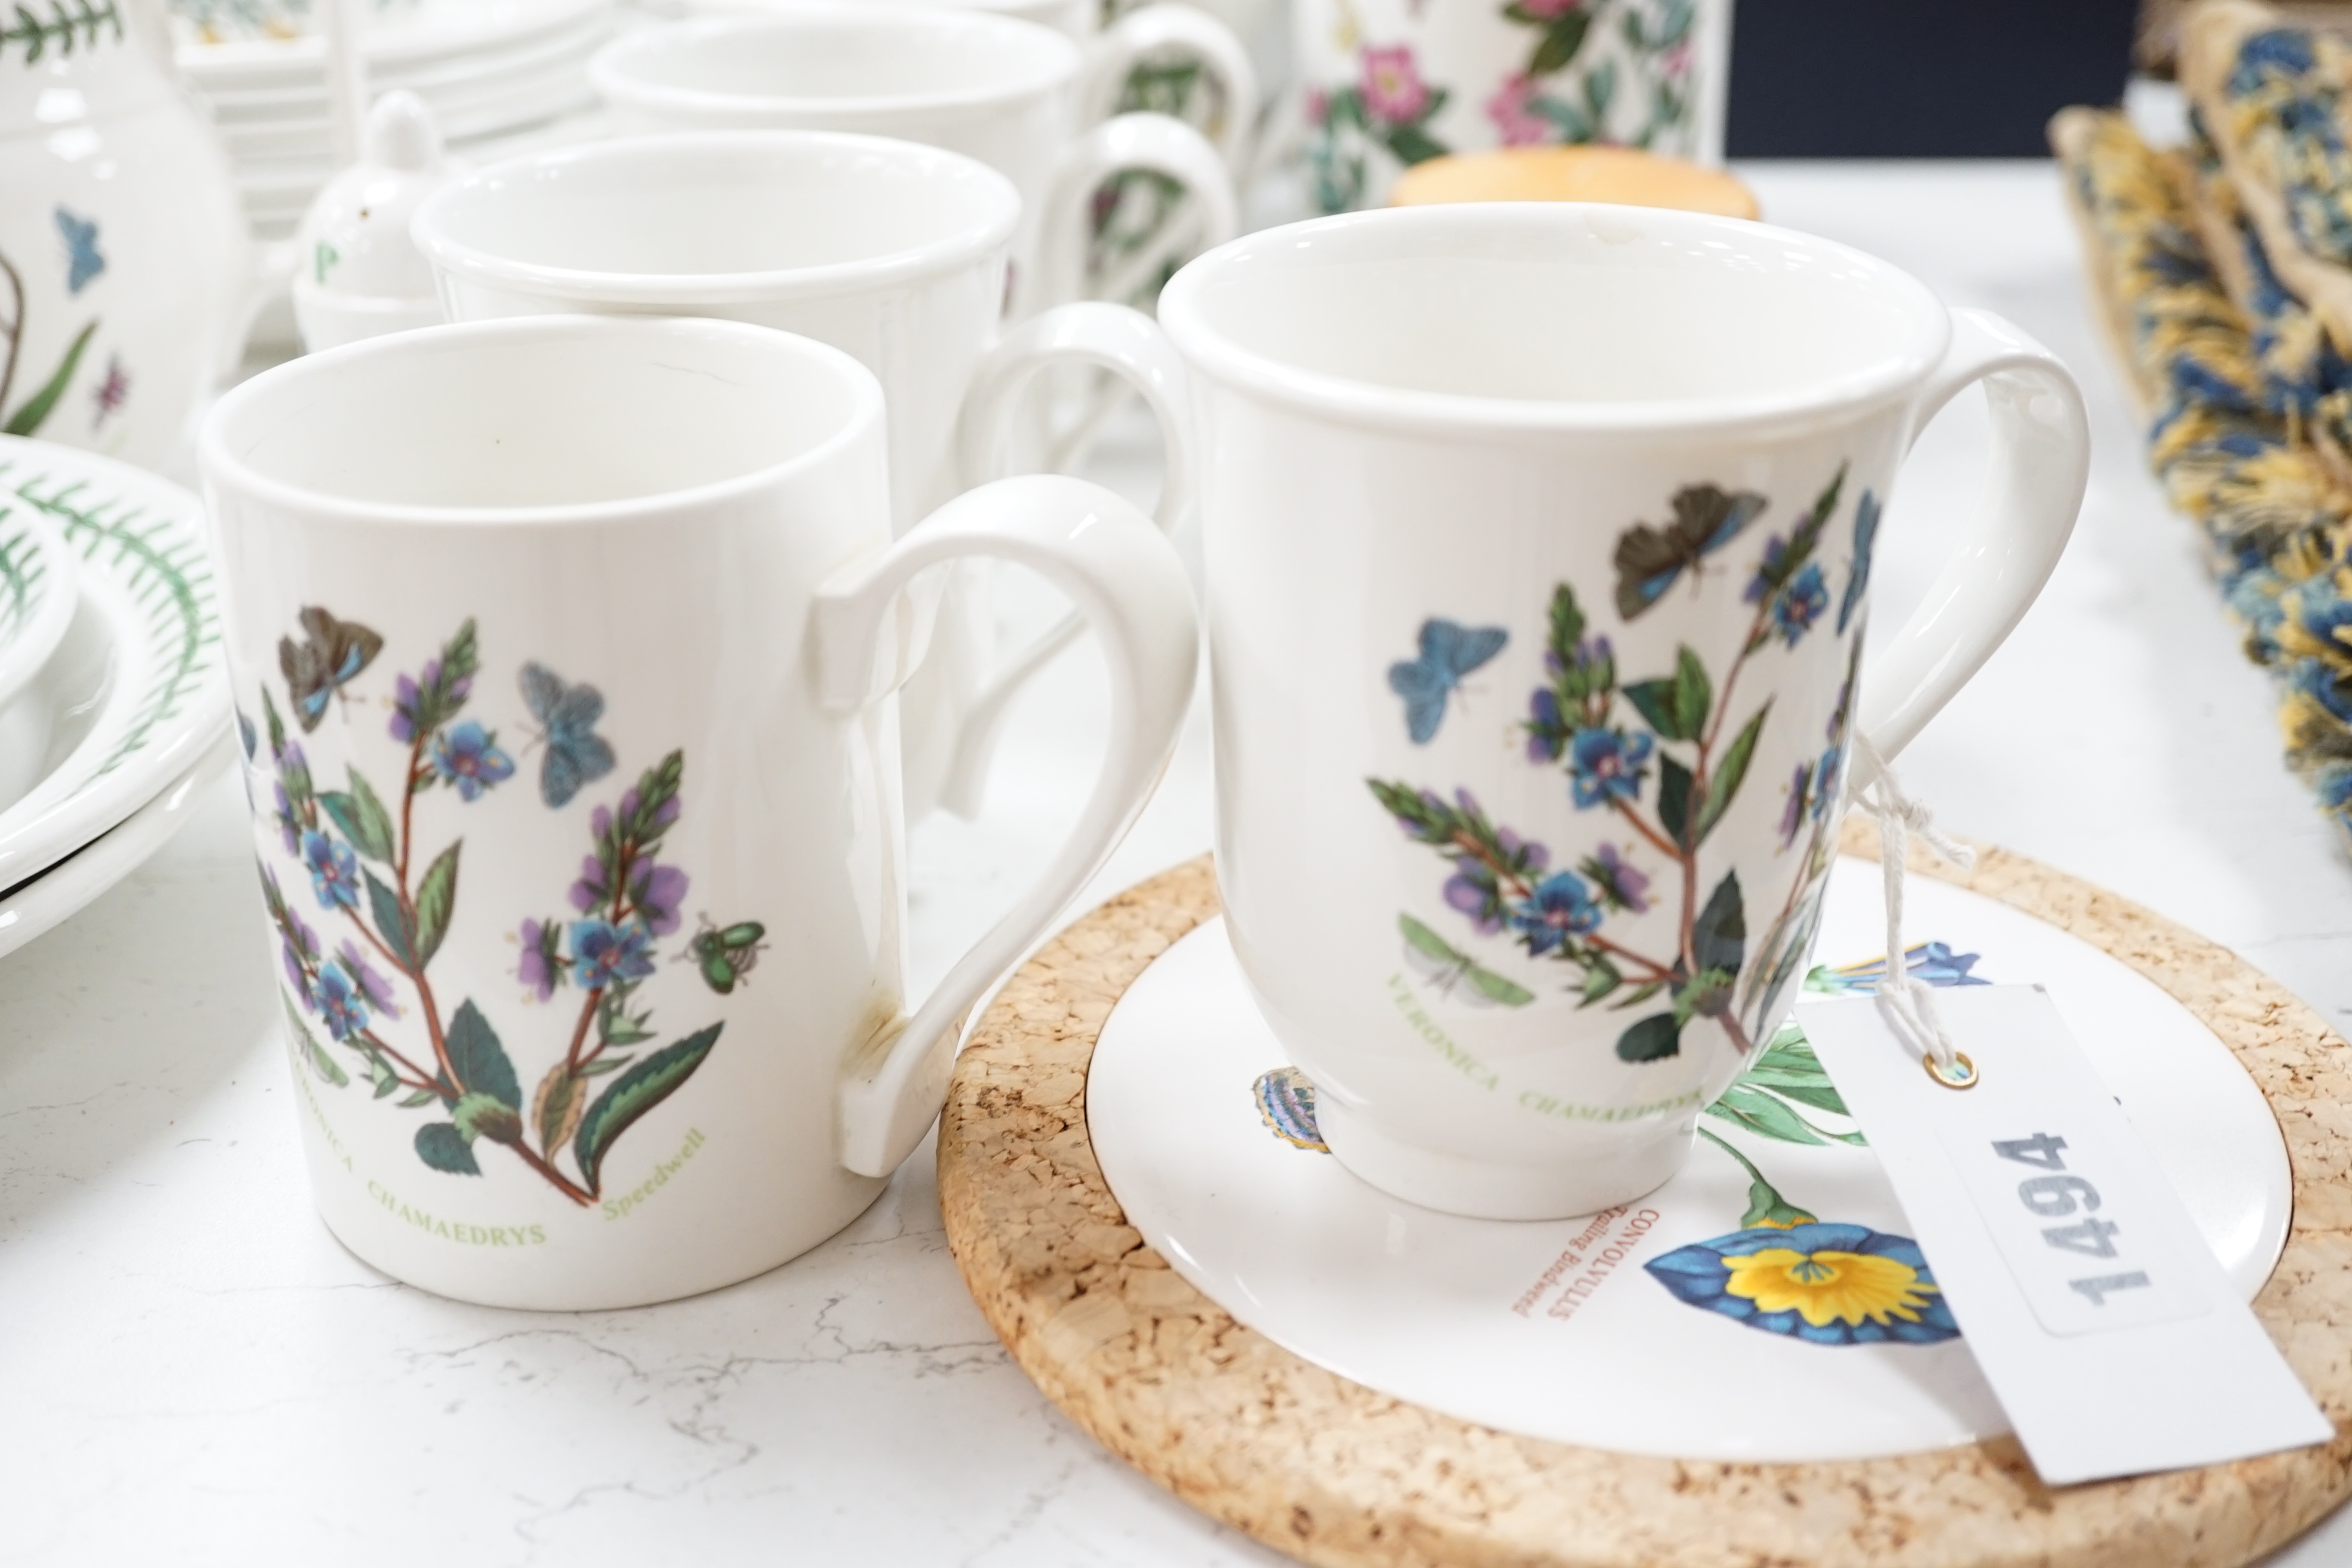 Portmeirion botanical dinner wares including mugs, storage jars and plates, largest 26cm in - Image 2 of 7